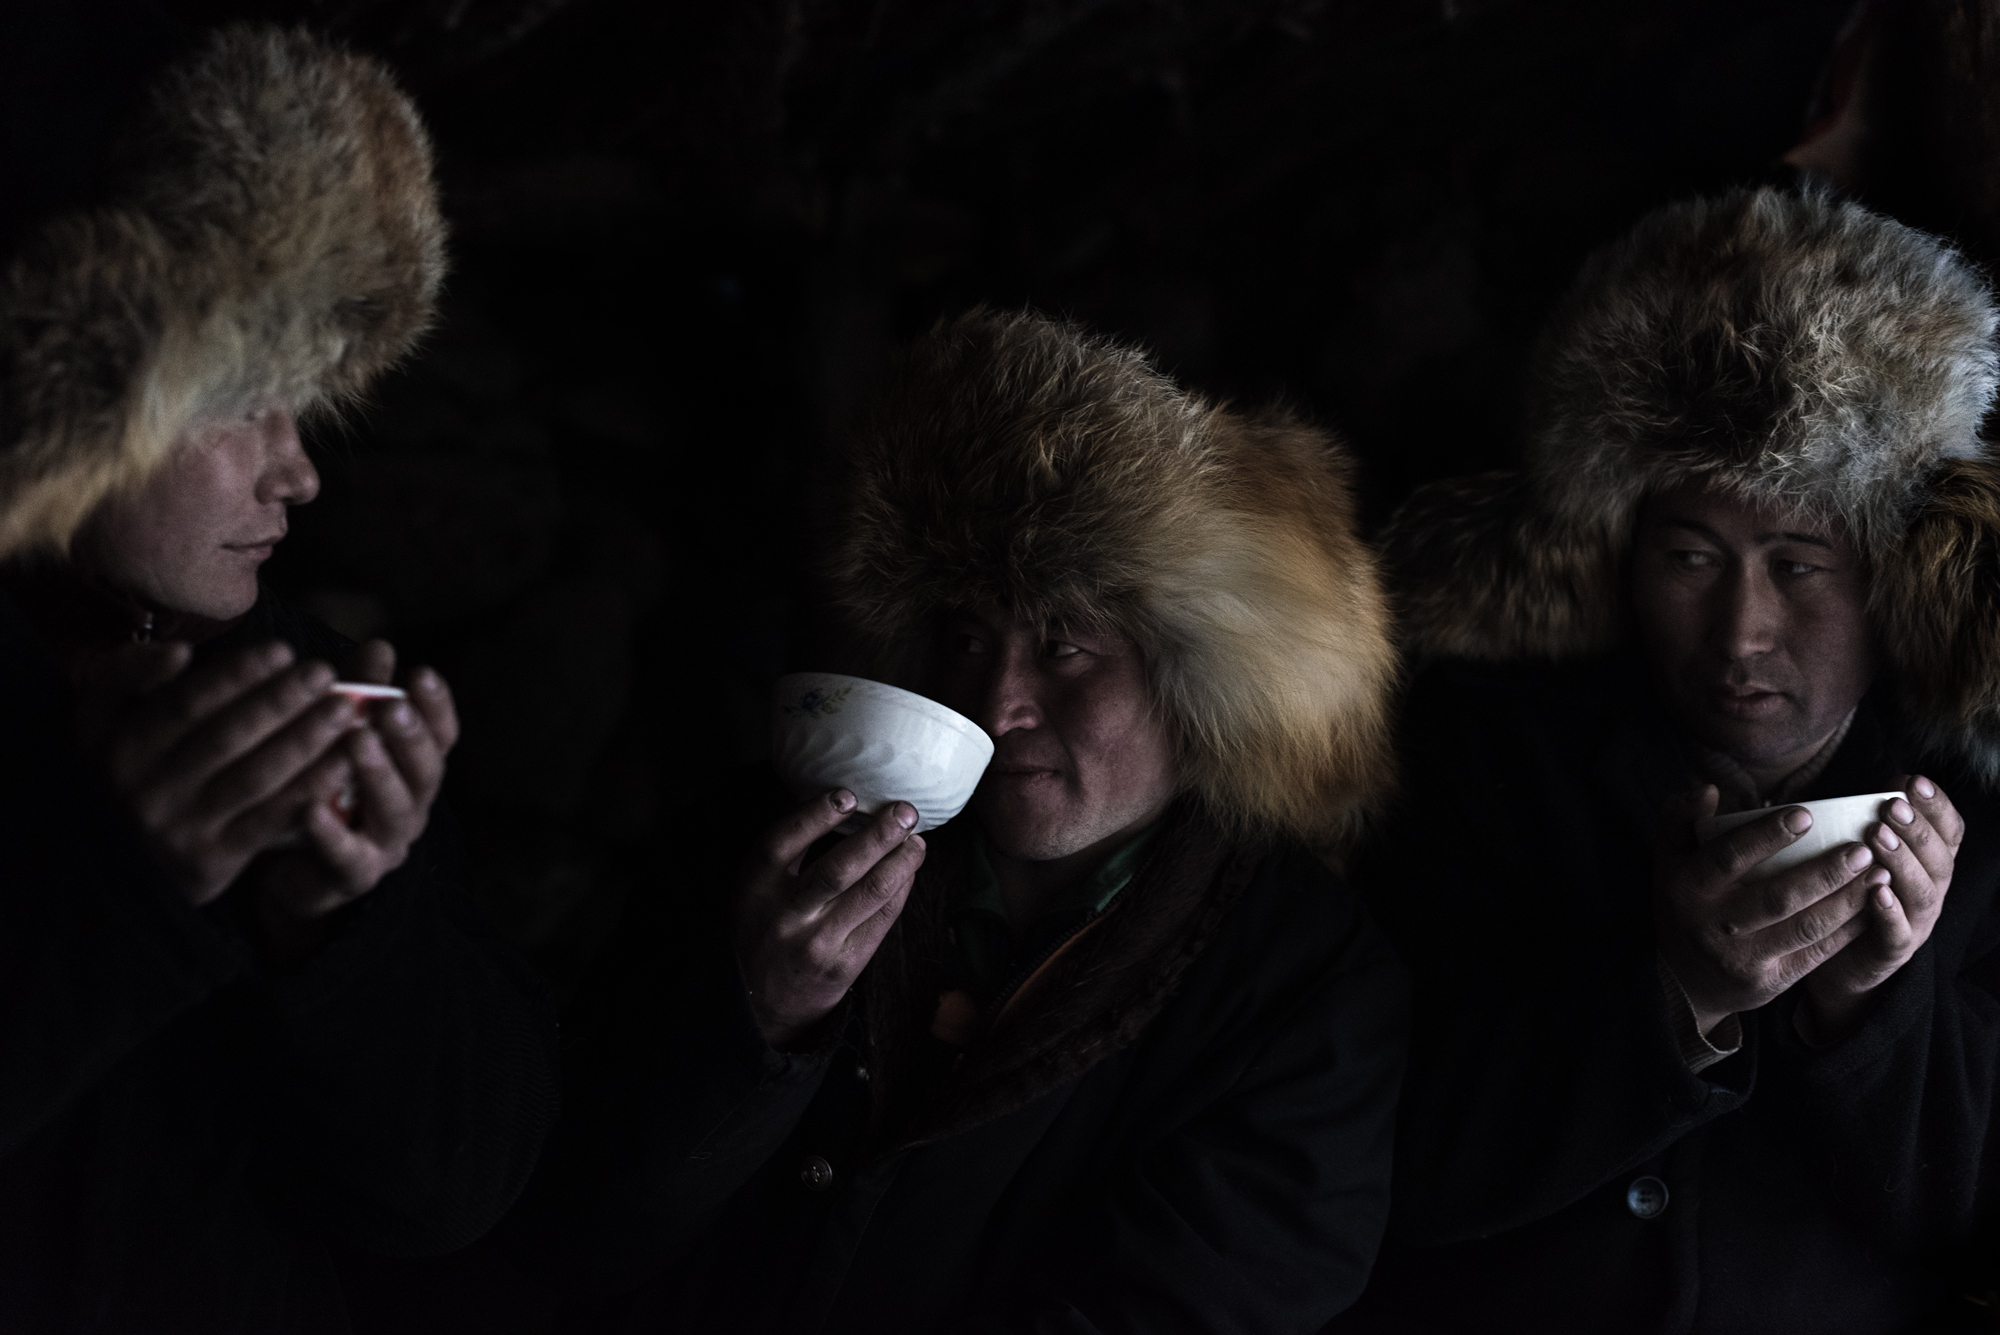 A welcome cup of chai at the end of another day on the Kazakh winter migration.